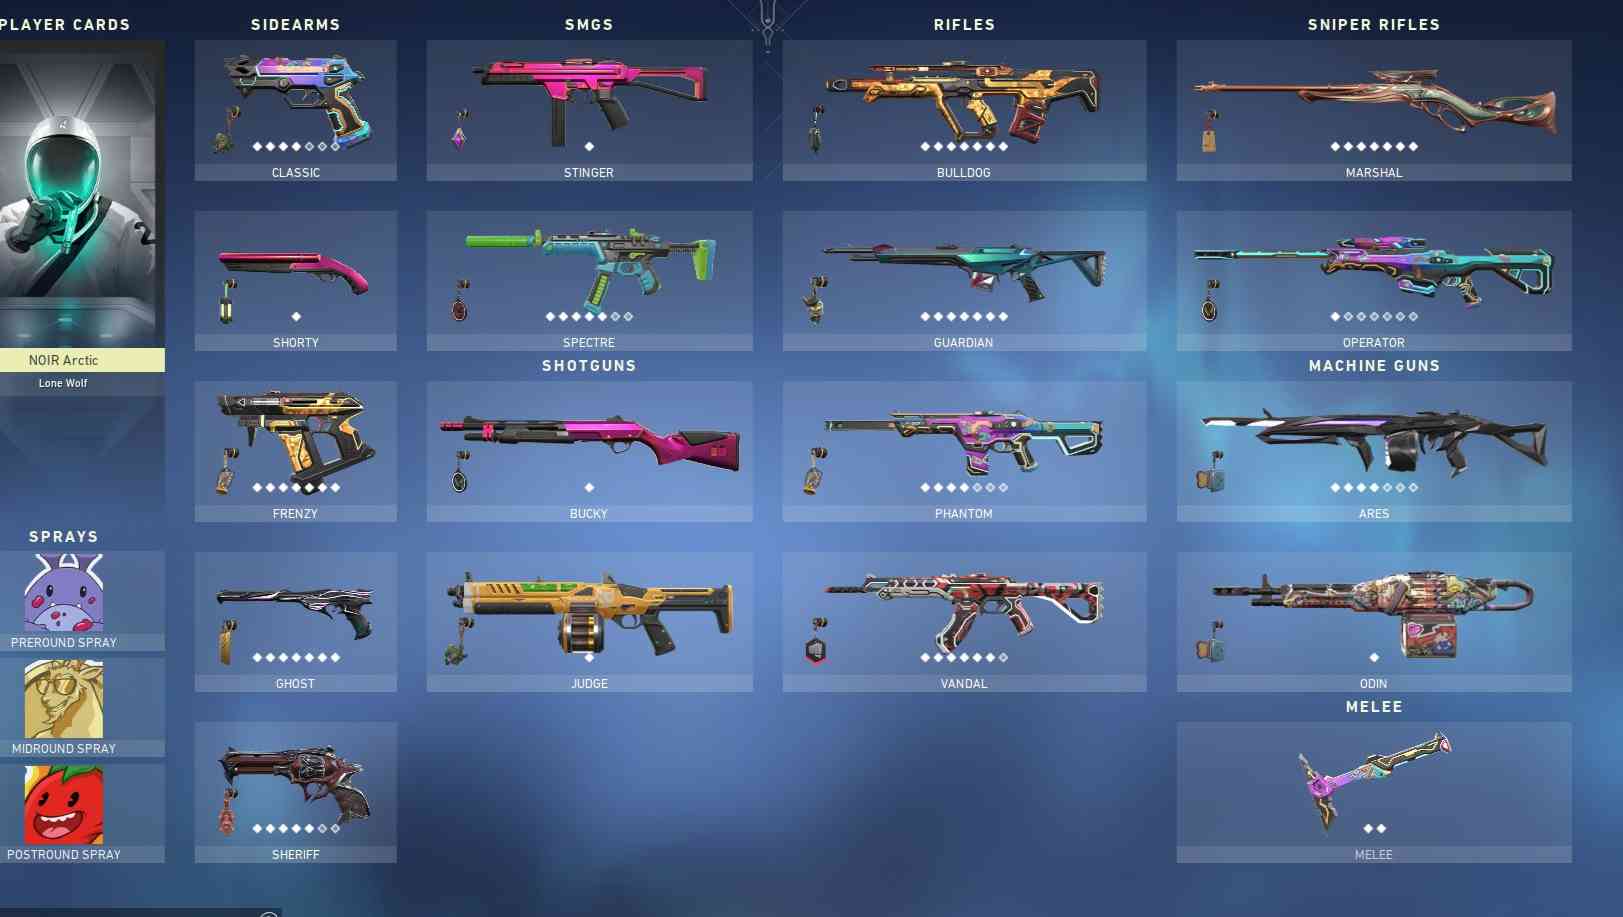 All Valorant skin bundles: tiers, weapons, prices - Dexerto